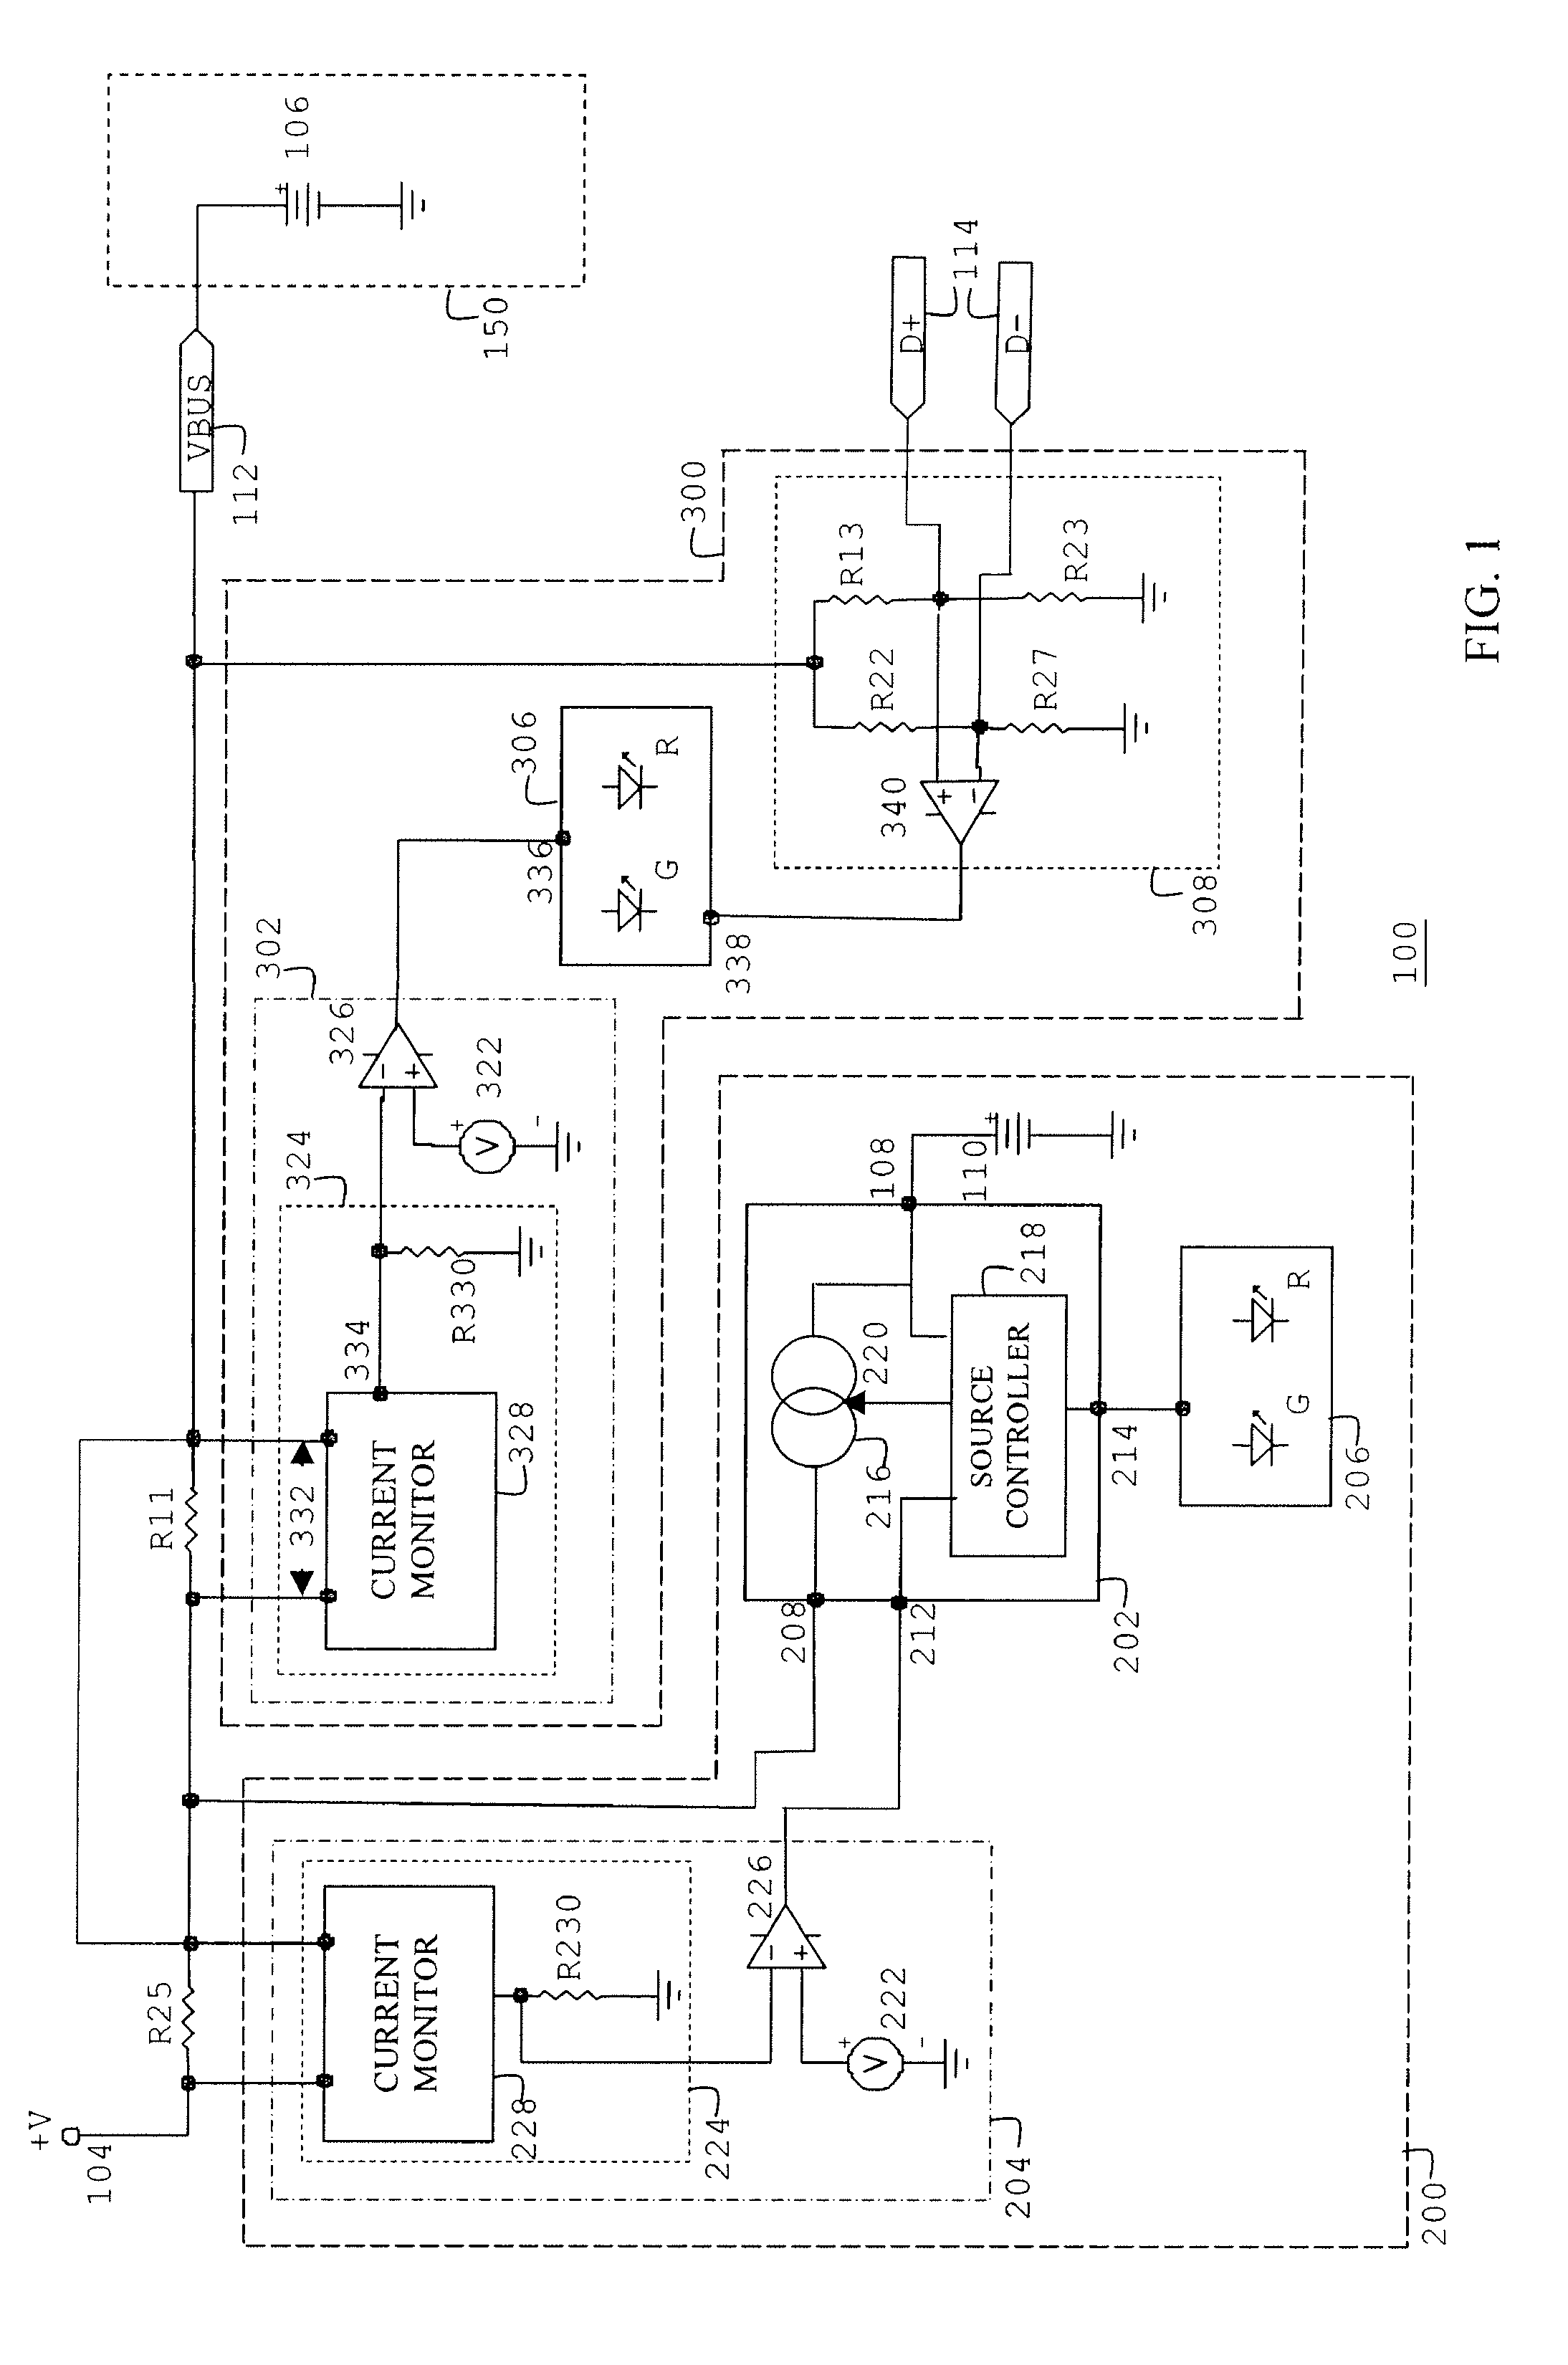 Battery charger for a handheld computing device and an external battery